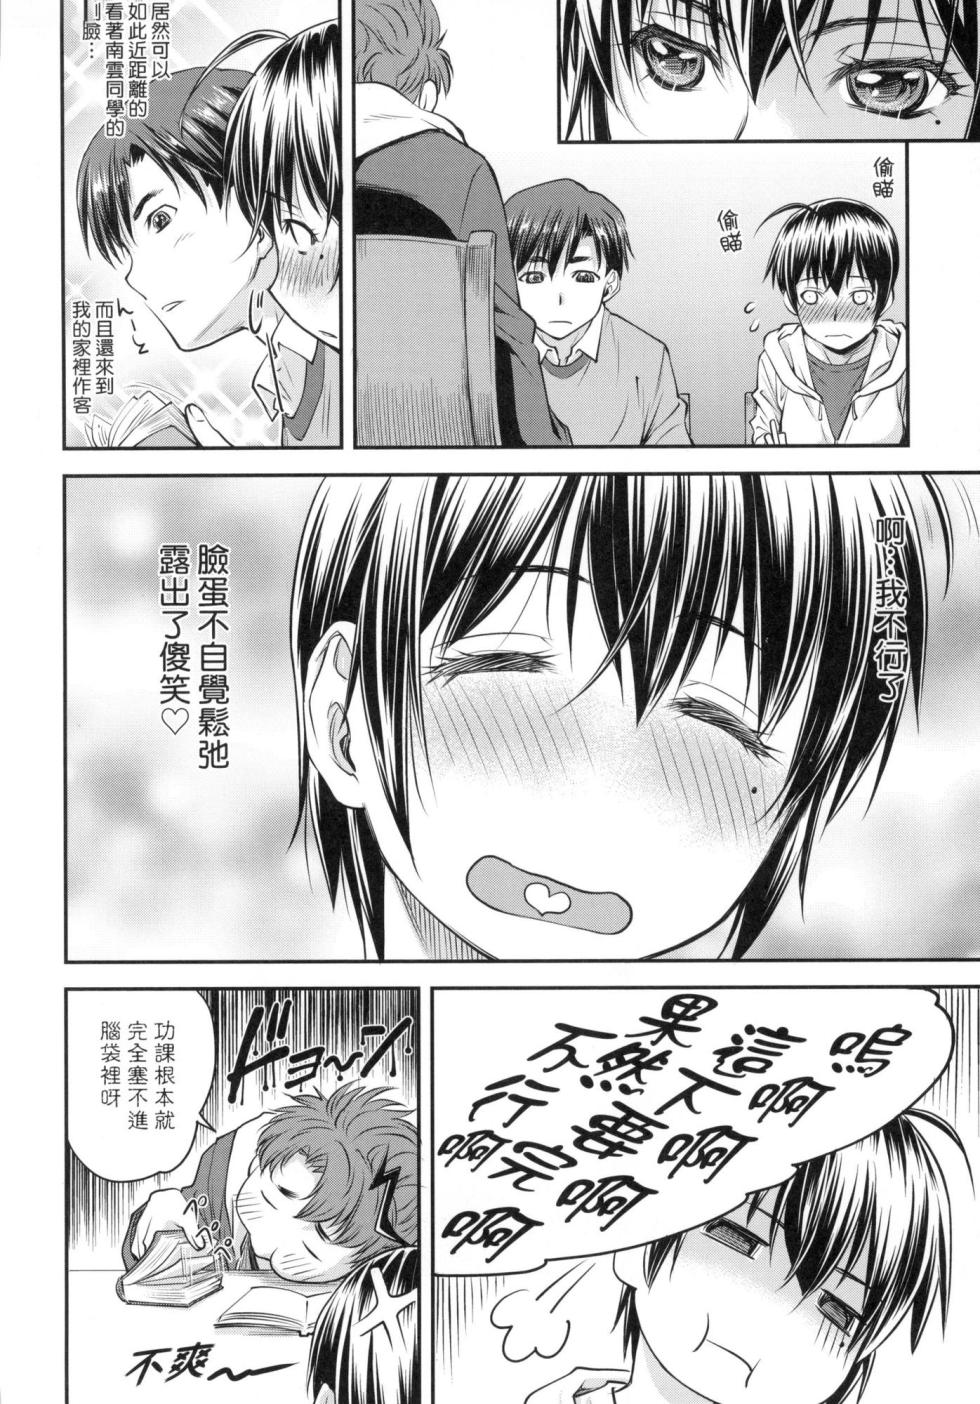 [Nagare Ippon] Kaname Date Jou | 小要開發Date 上 [Chinese] [Decensored] - Page 13